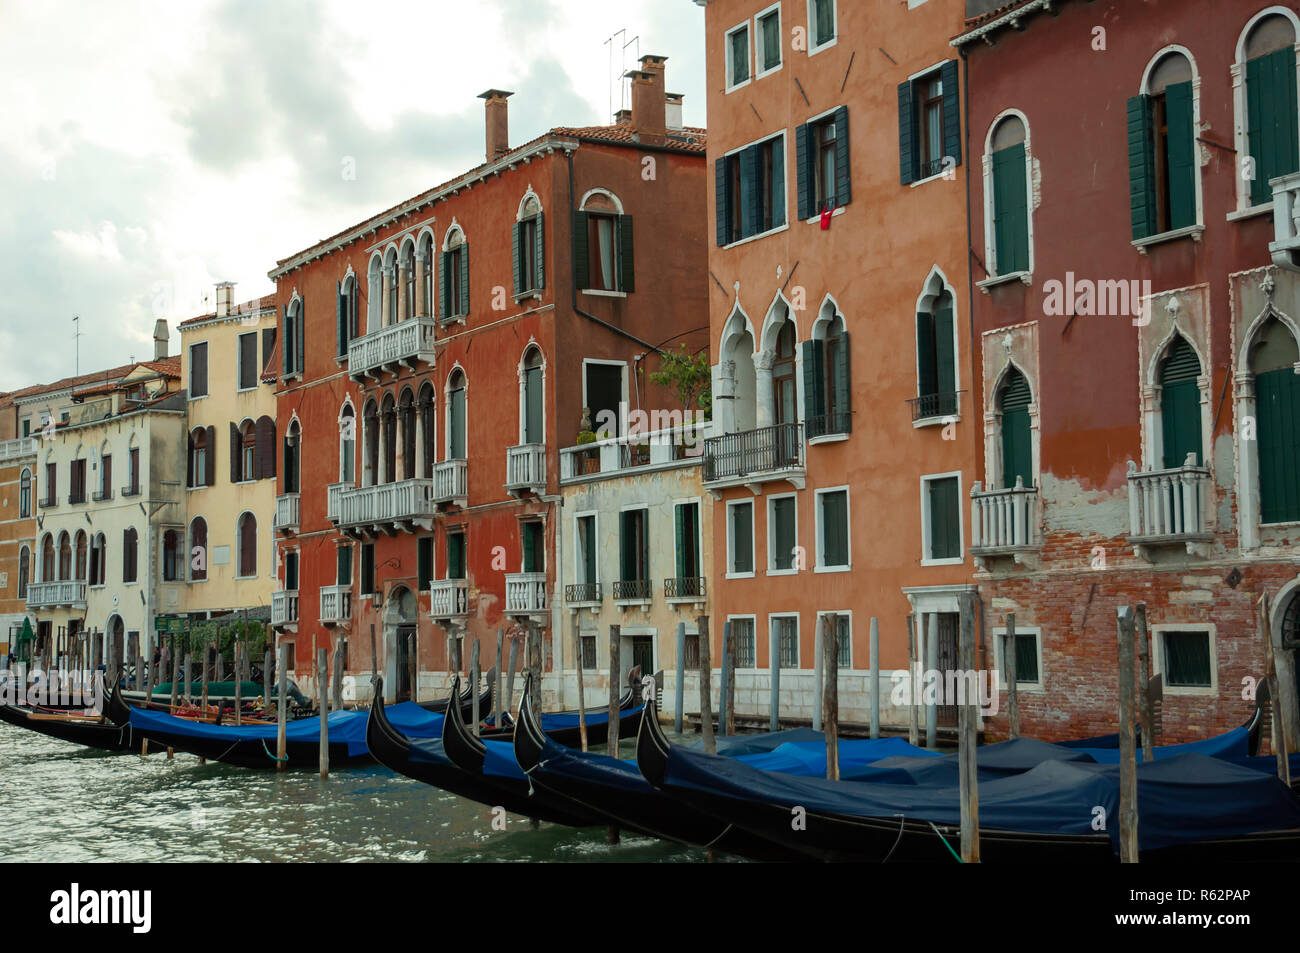 Long shot of buildings along a Venetian canal, with gondolas docked in front Stock Photo